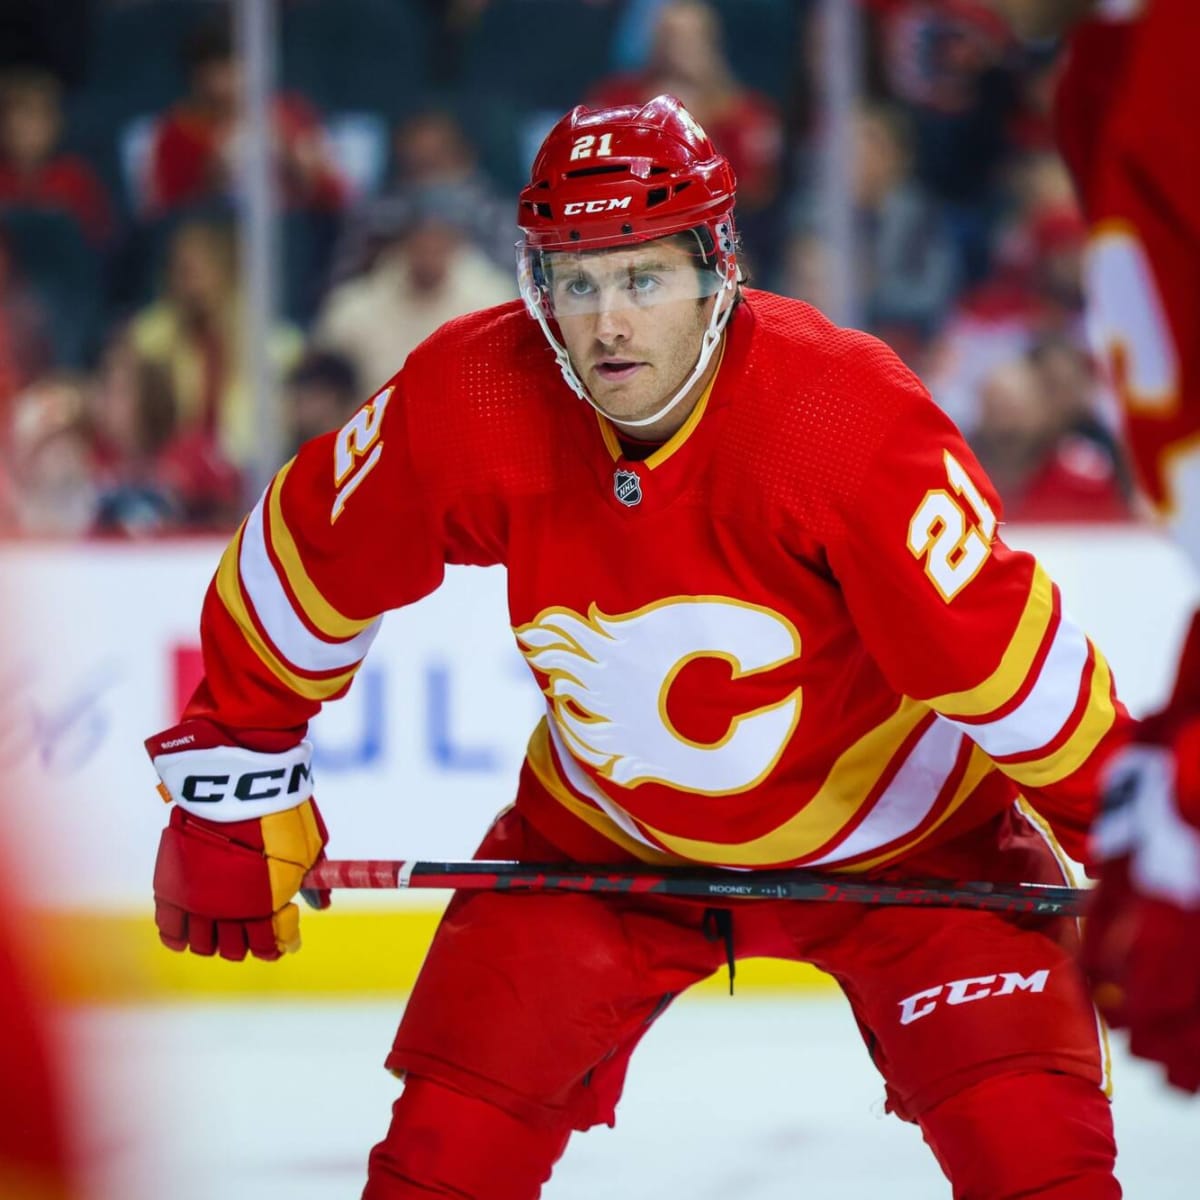 Calgary Flames - Flames Roster Update: Forward Kevin Rooney has been  assigned to the Calgary Wranglers. In addition, forward Radim Zohorna has  been recalled by the Flames.